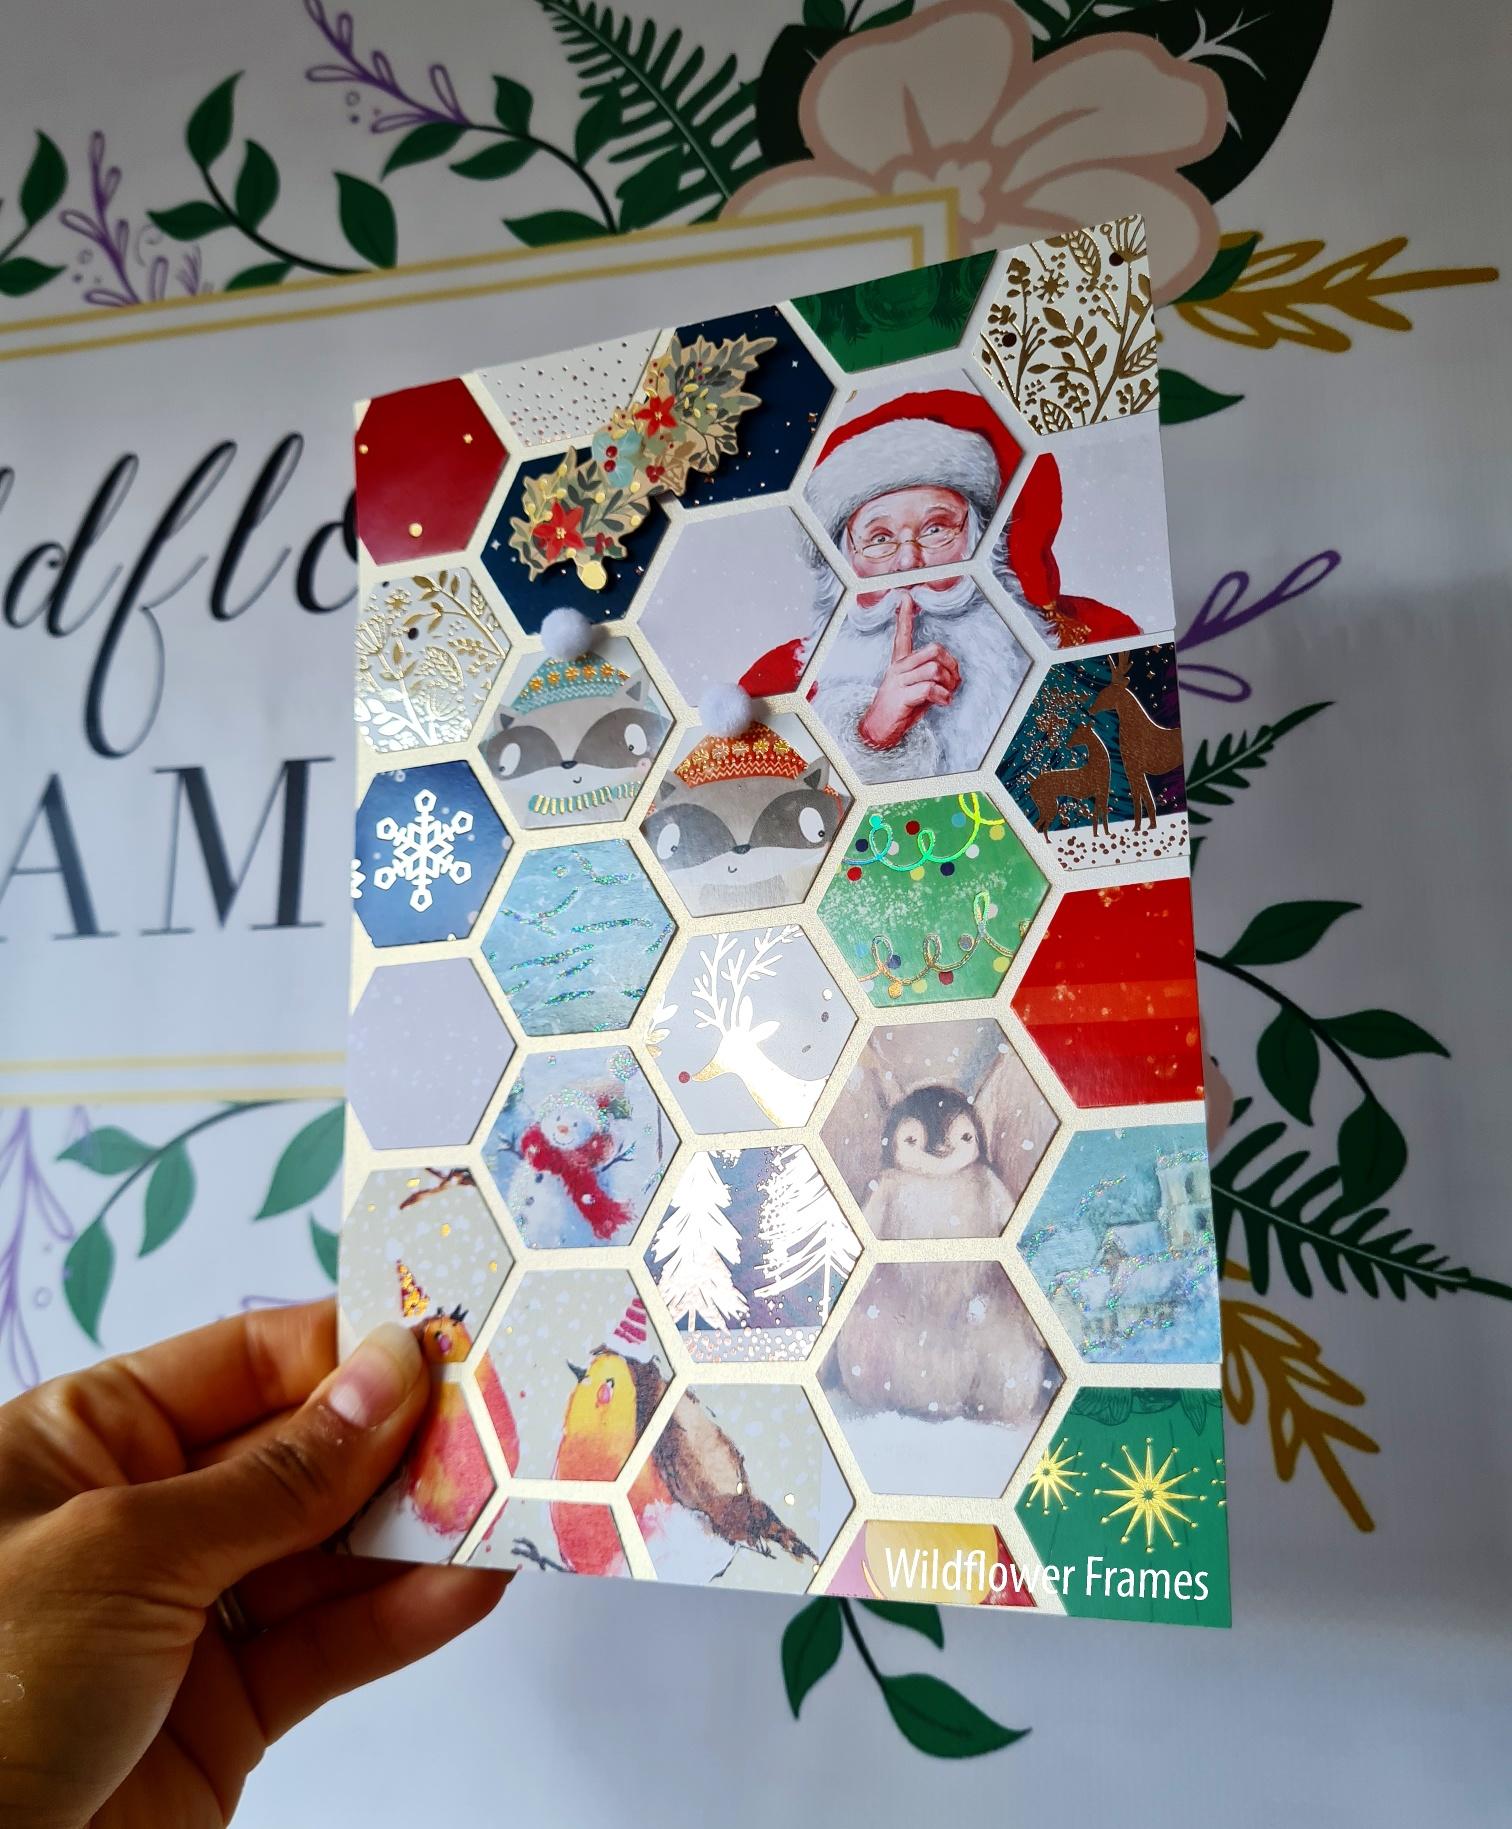 A5 Keepsake Card Collage made with Christmas Cards